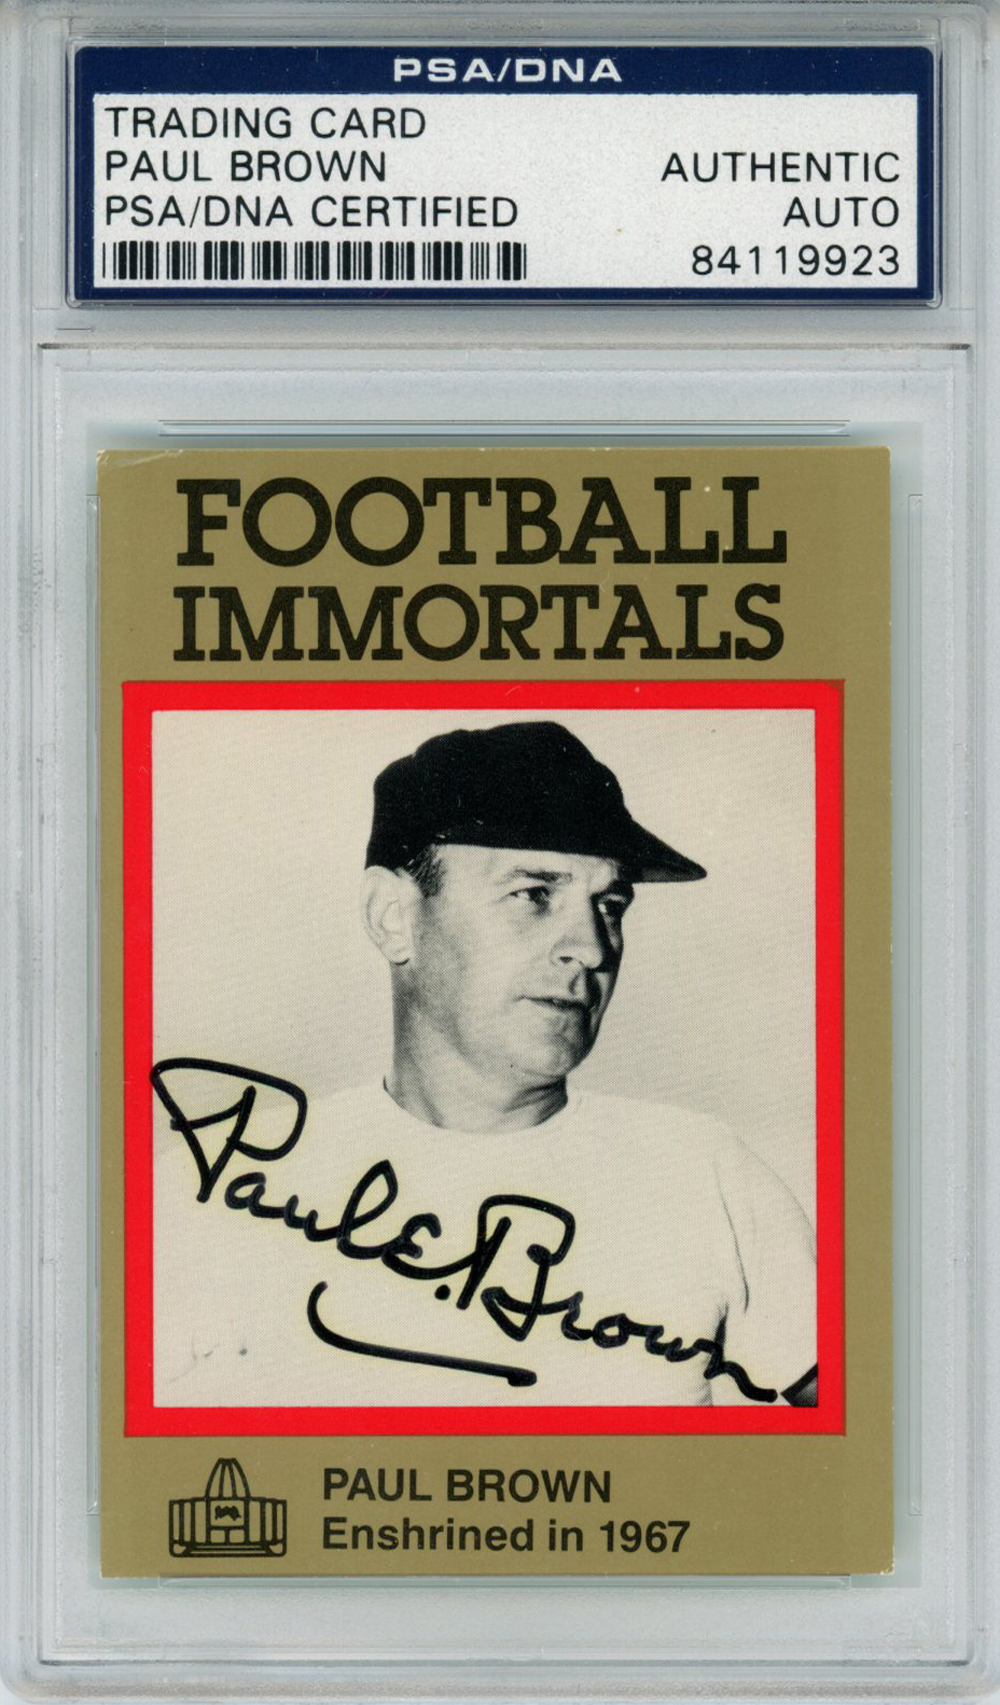 Paul Brown Autographed/Signed 1985 Football Immortals Card PSA Slab 33010